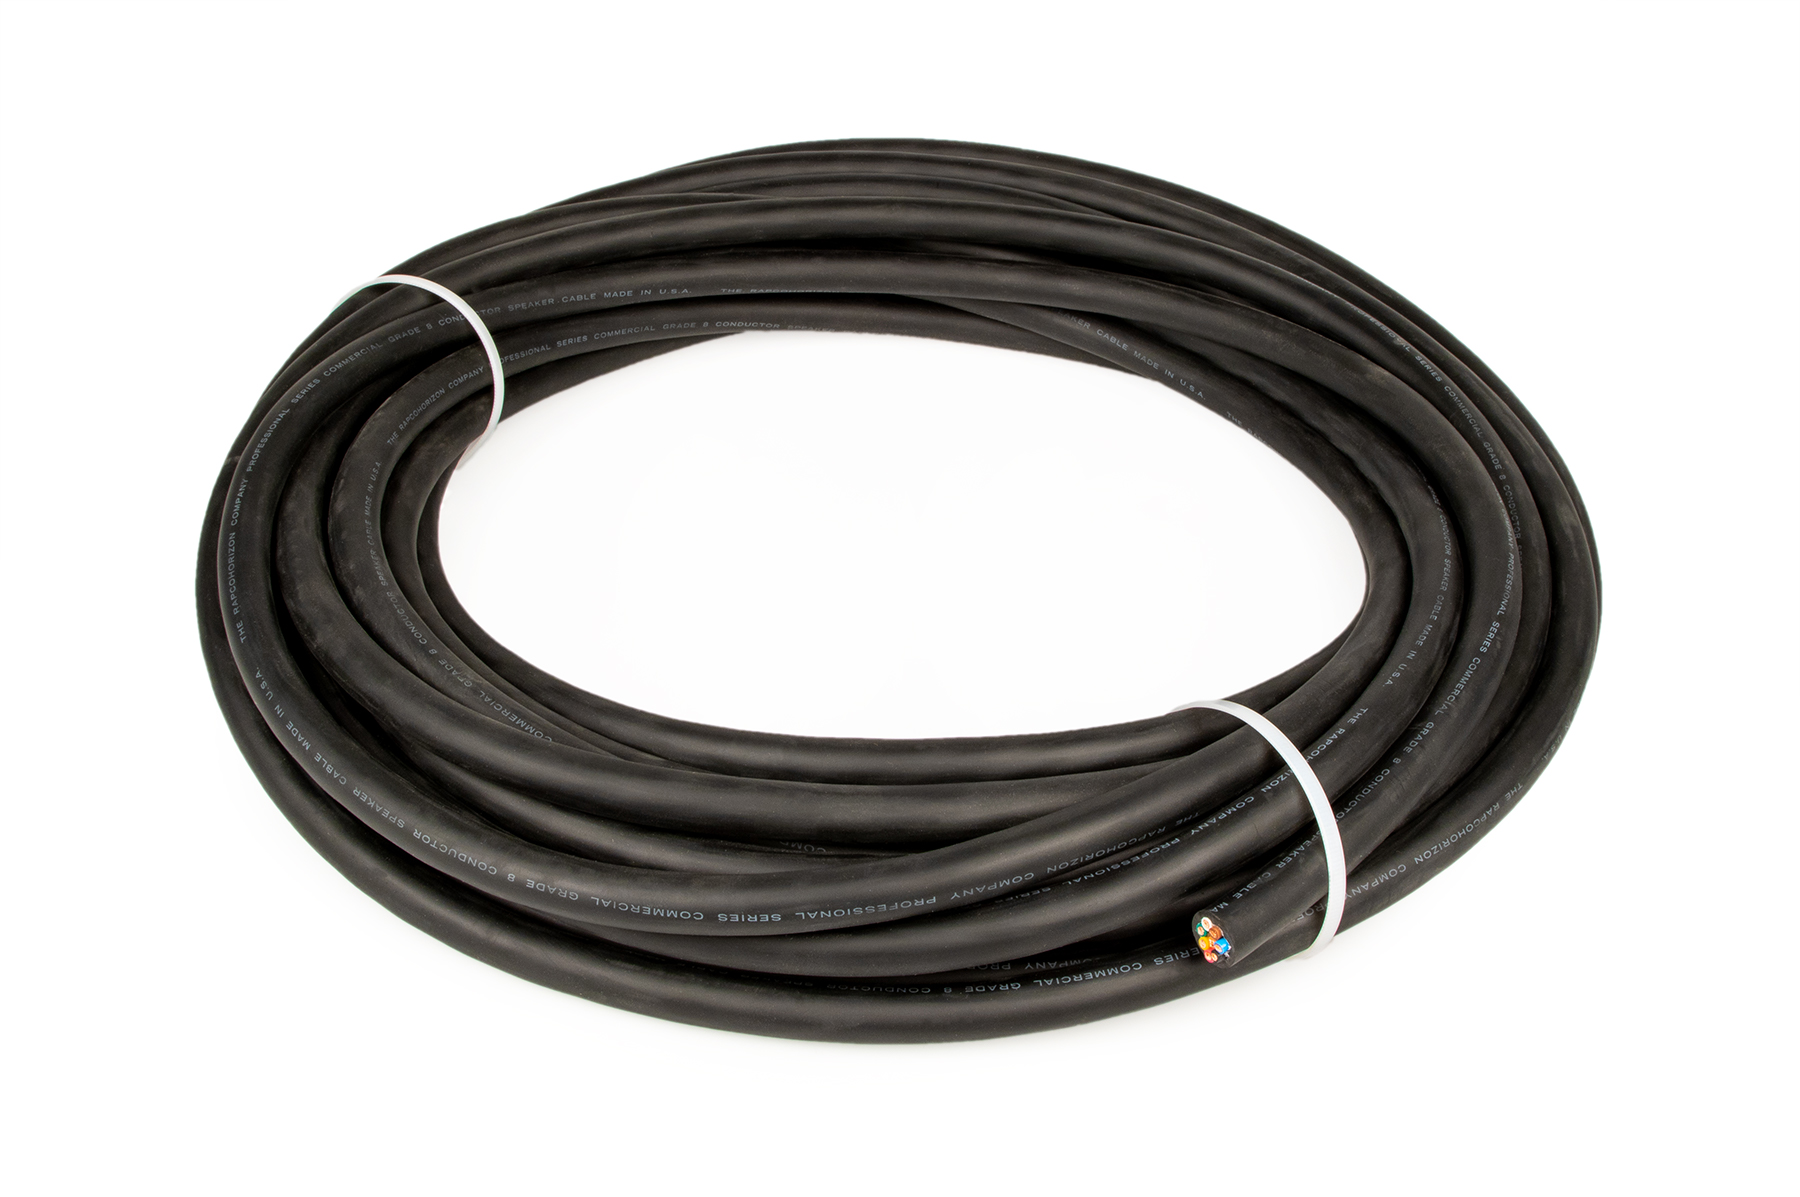 Pro Co ProCo 13-8-100 100' 8-Conductor 13AWG Speaker Cable | Full 